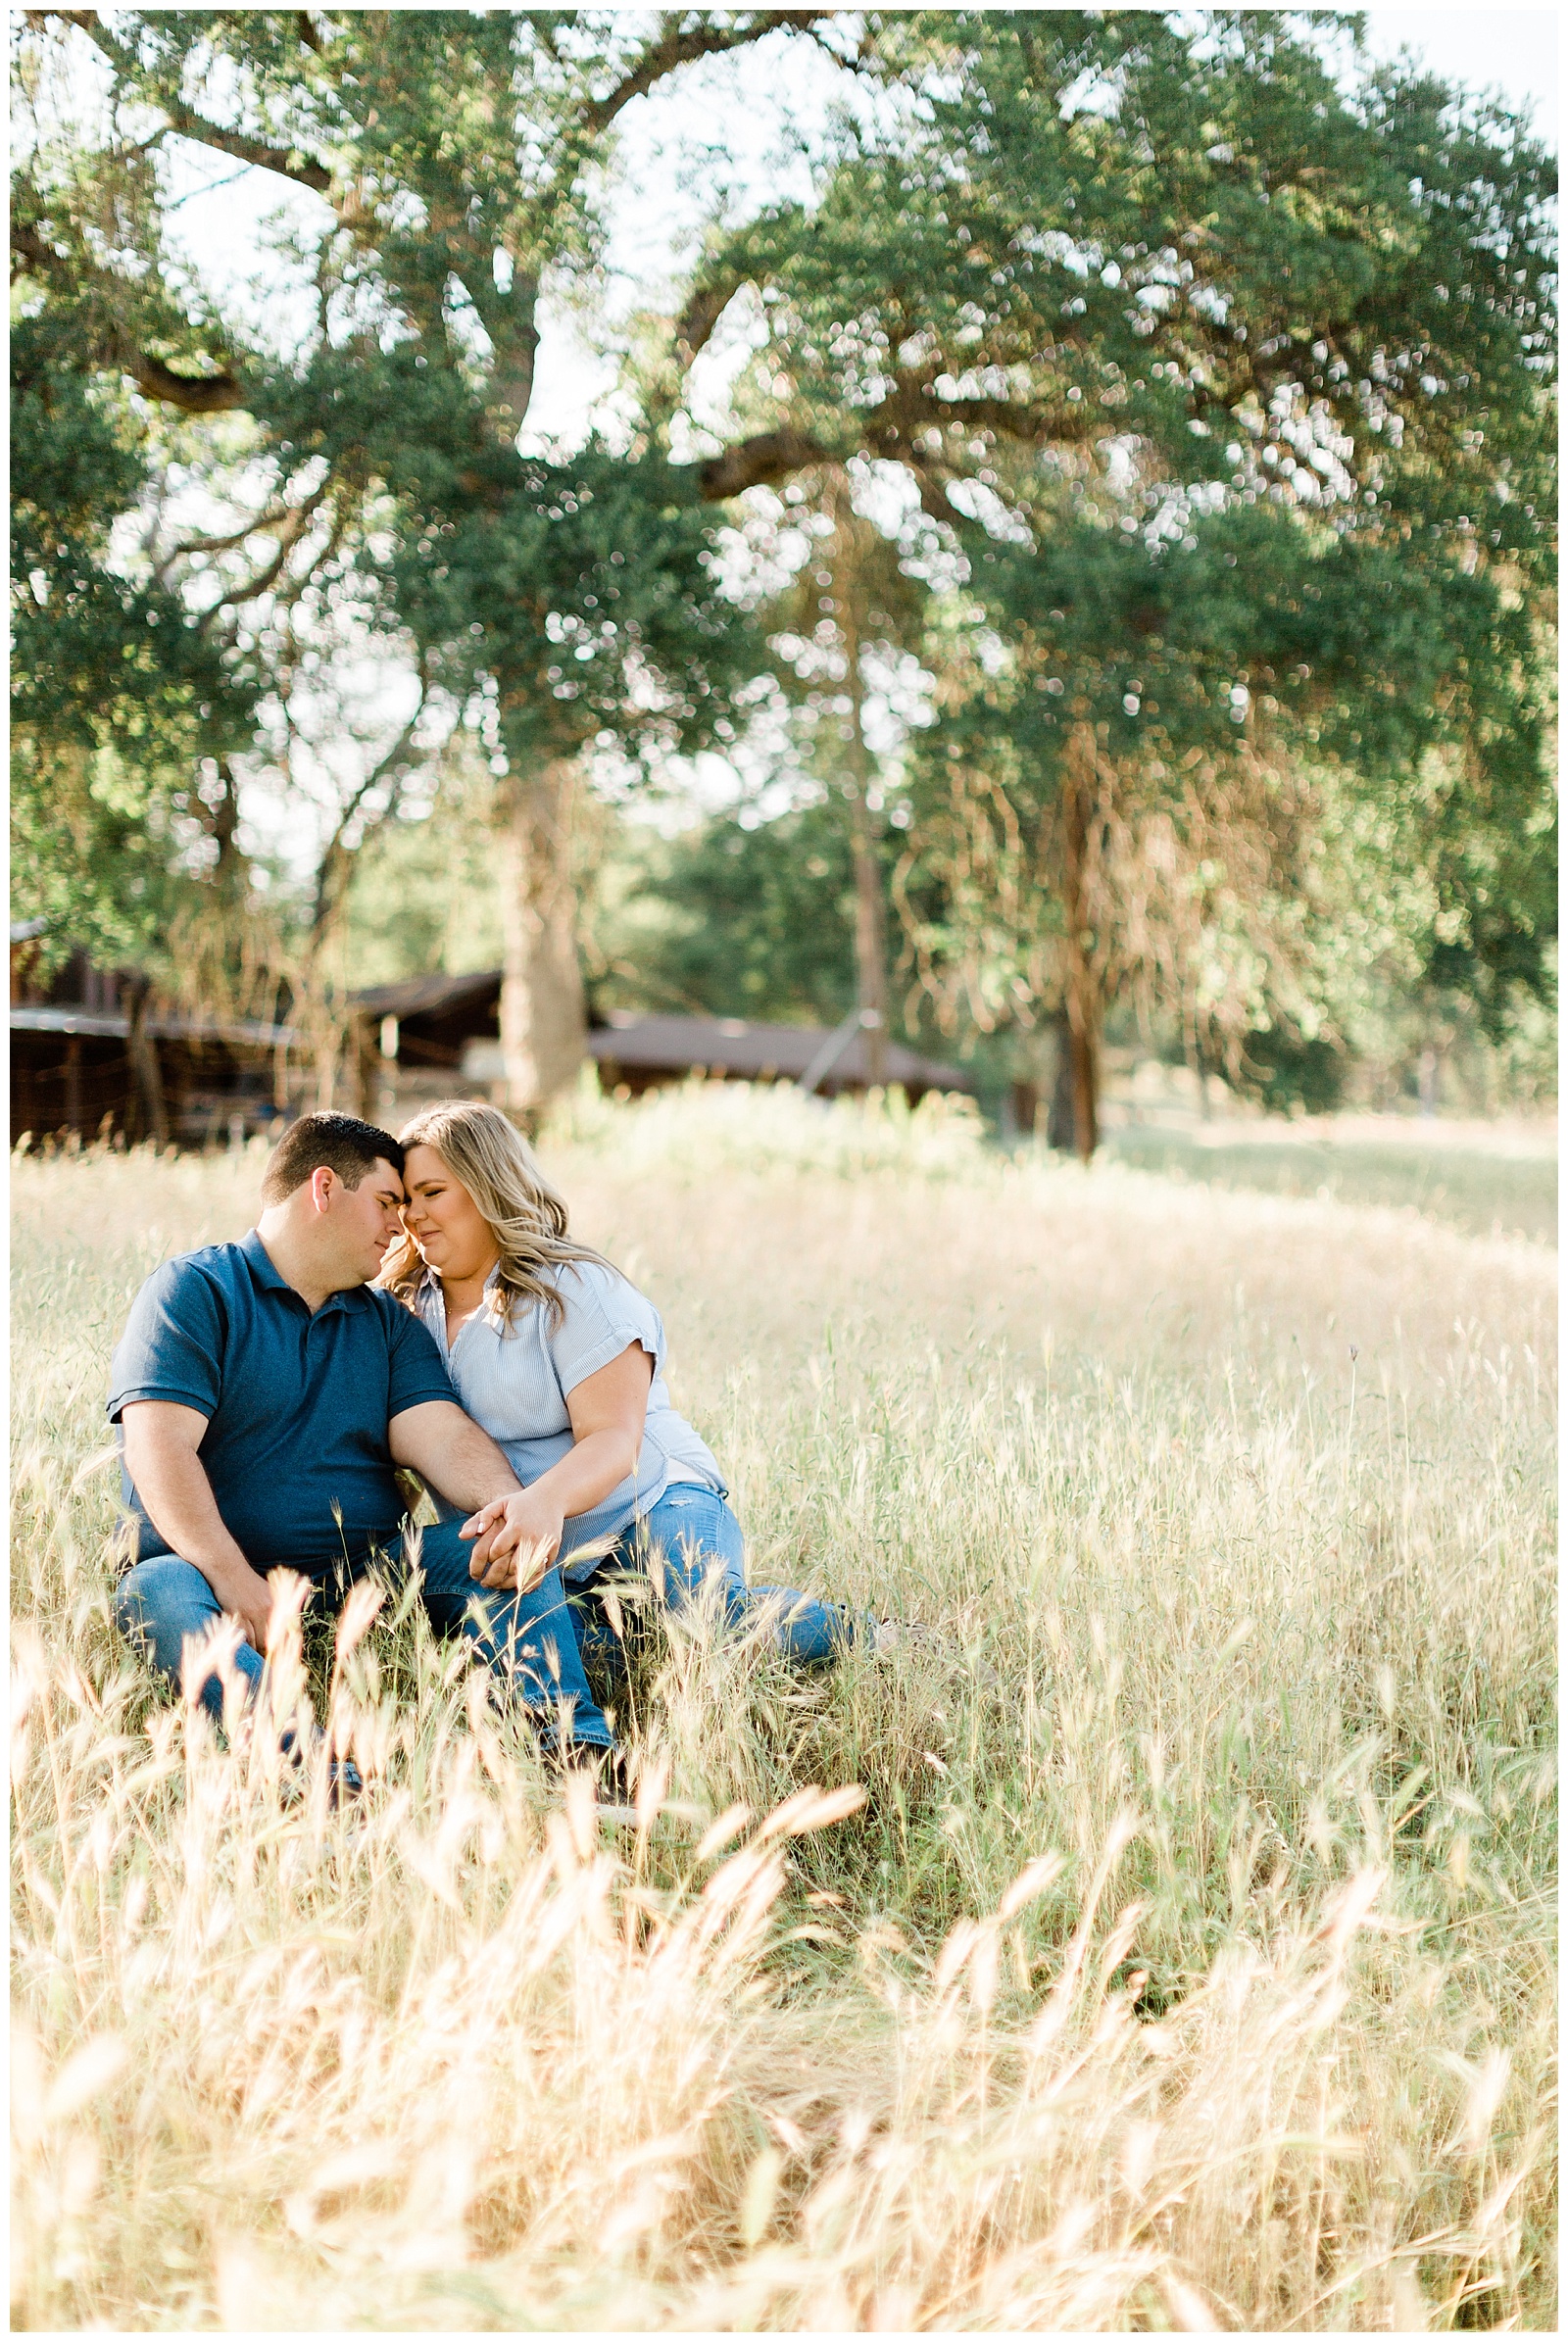 navy and blue engagement photo outfit ideas for a rustic engagement session